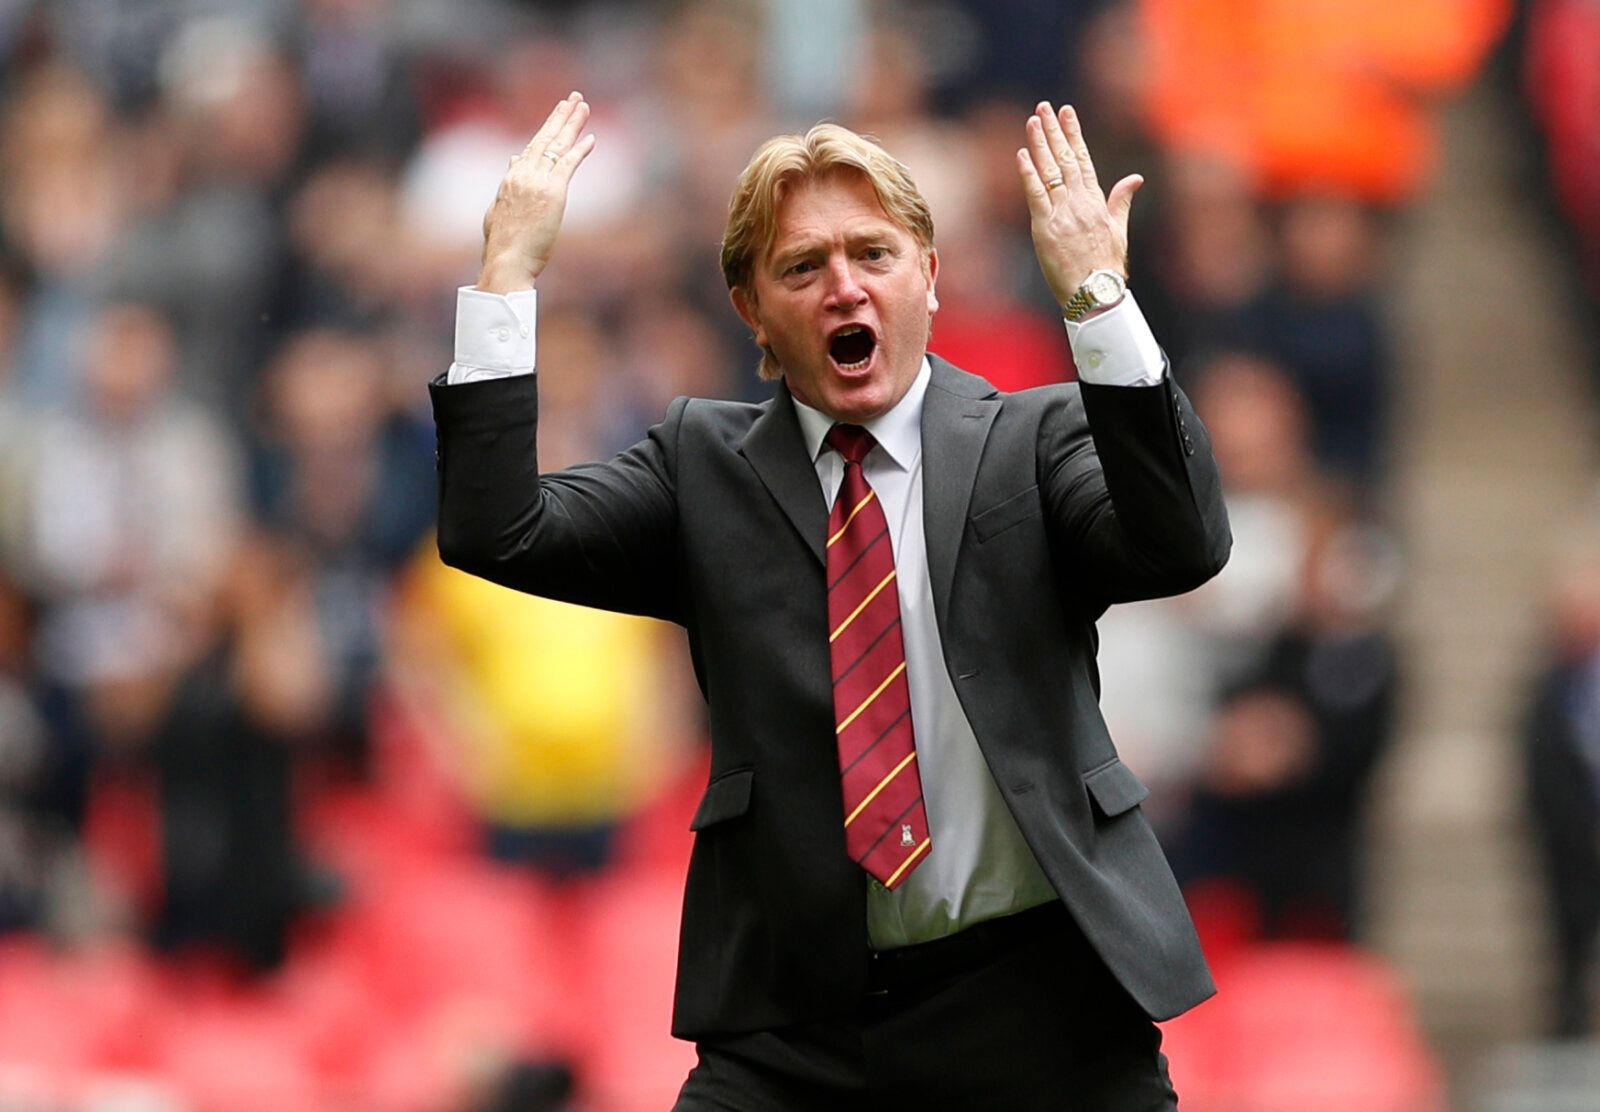 Britain Football Soccer - Bradford City v Millwall - Sky Bet League One Play-Off Final - Wembley Stadium, London, England - 20/5/17 Bradford manager Stuart McCall before the match  Mandatory Credit: Action Images / John Sibley Livepic EDITORIAL USE ONLY. No use with unauthorized audio, video, data, fixture lists, club/league logos or 